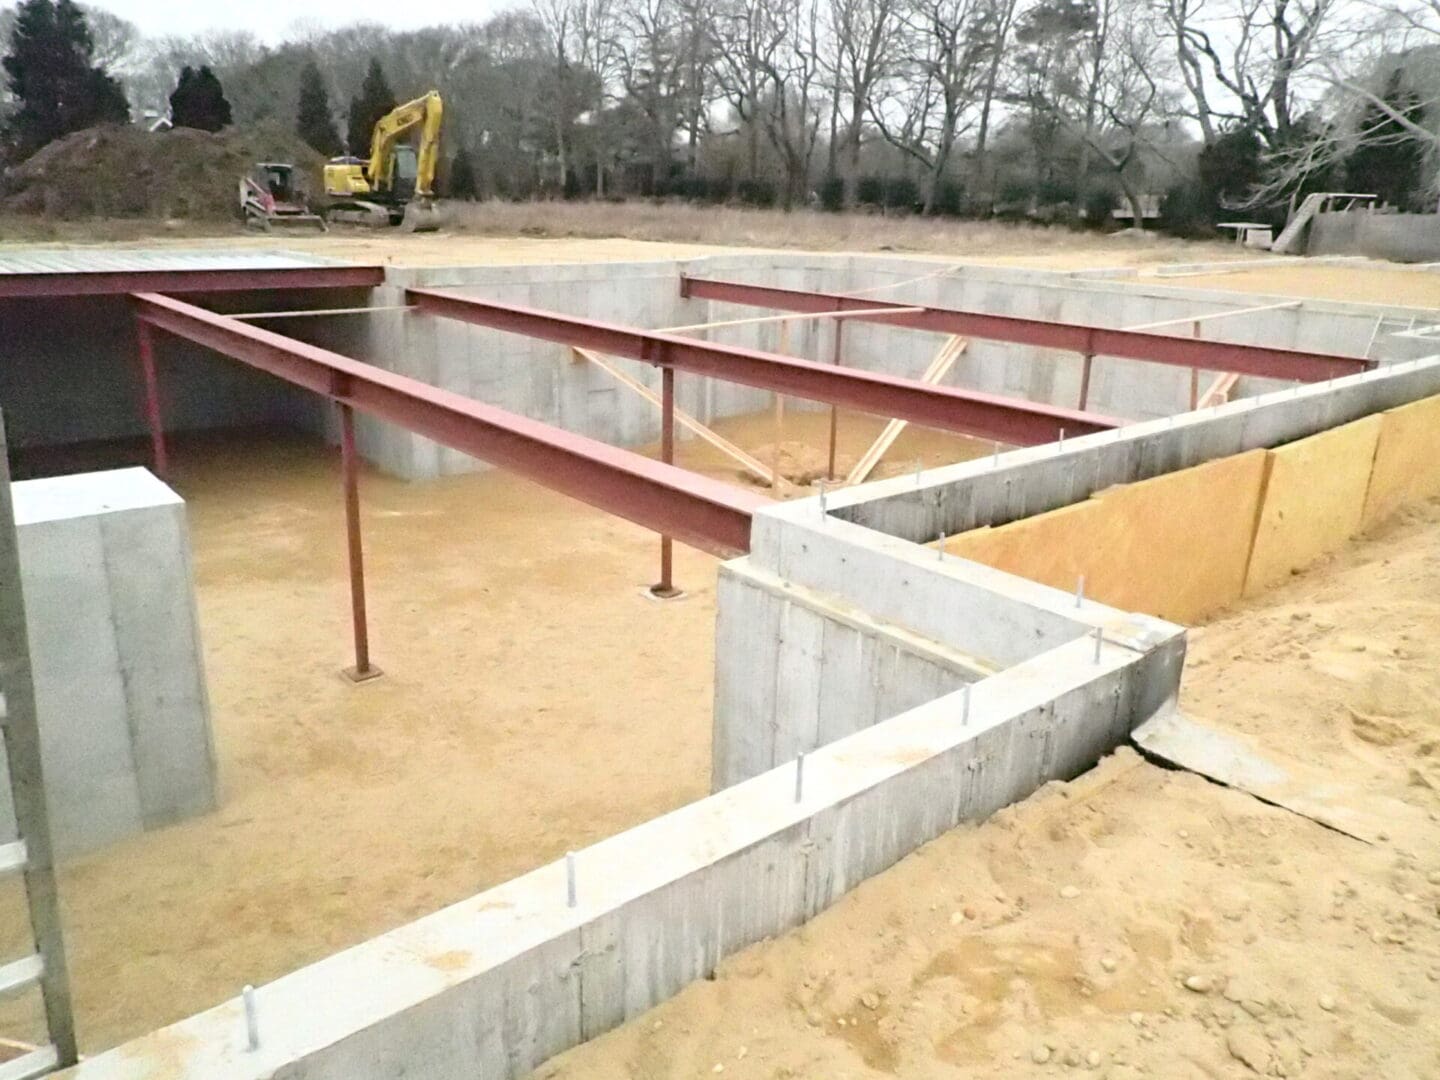 A concrete slab with metal beams and a steel beam.